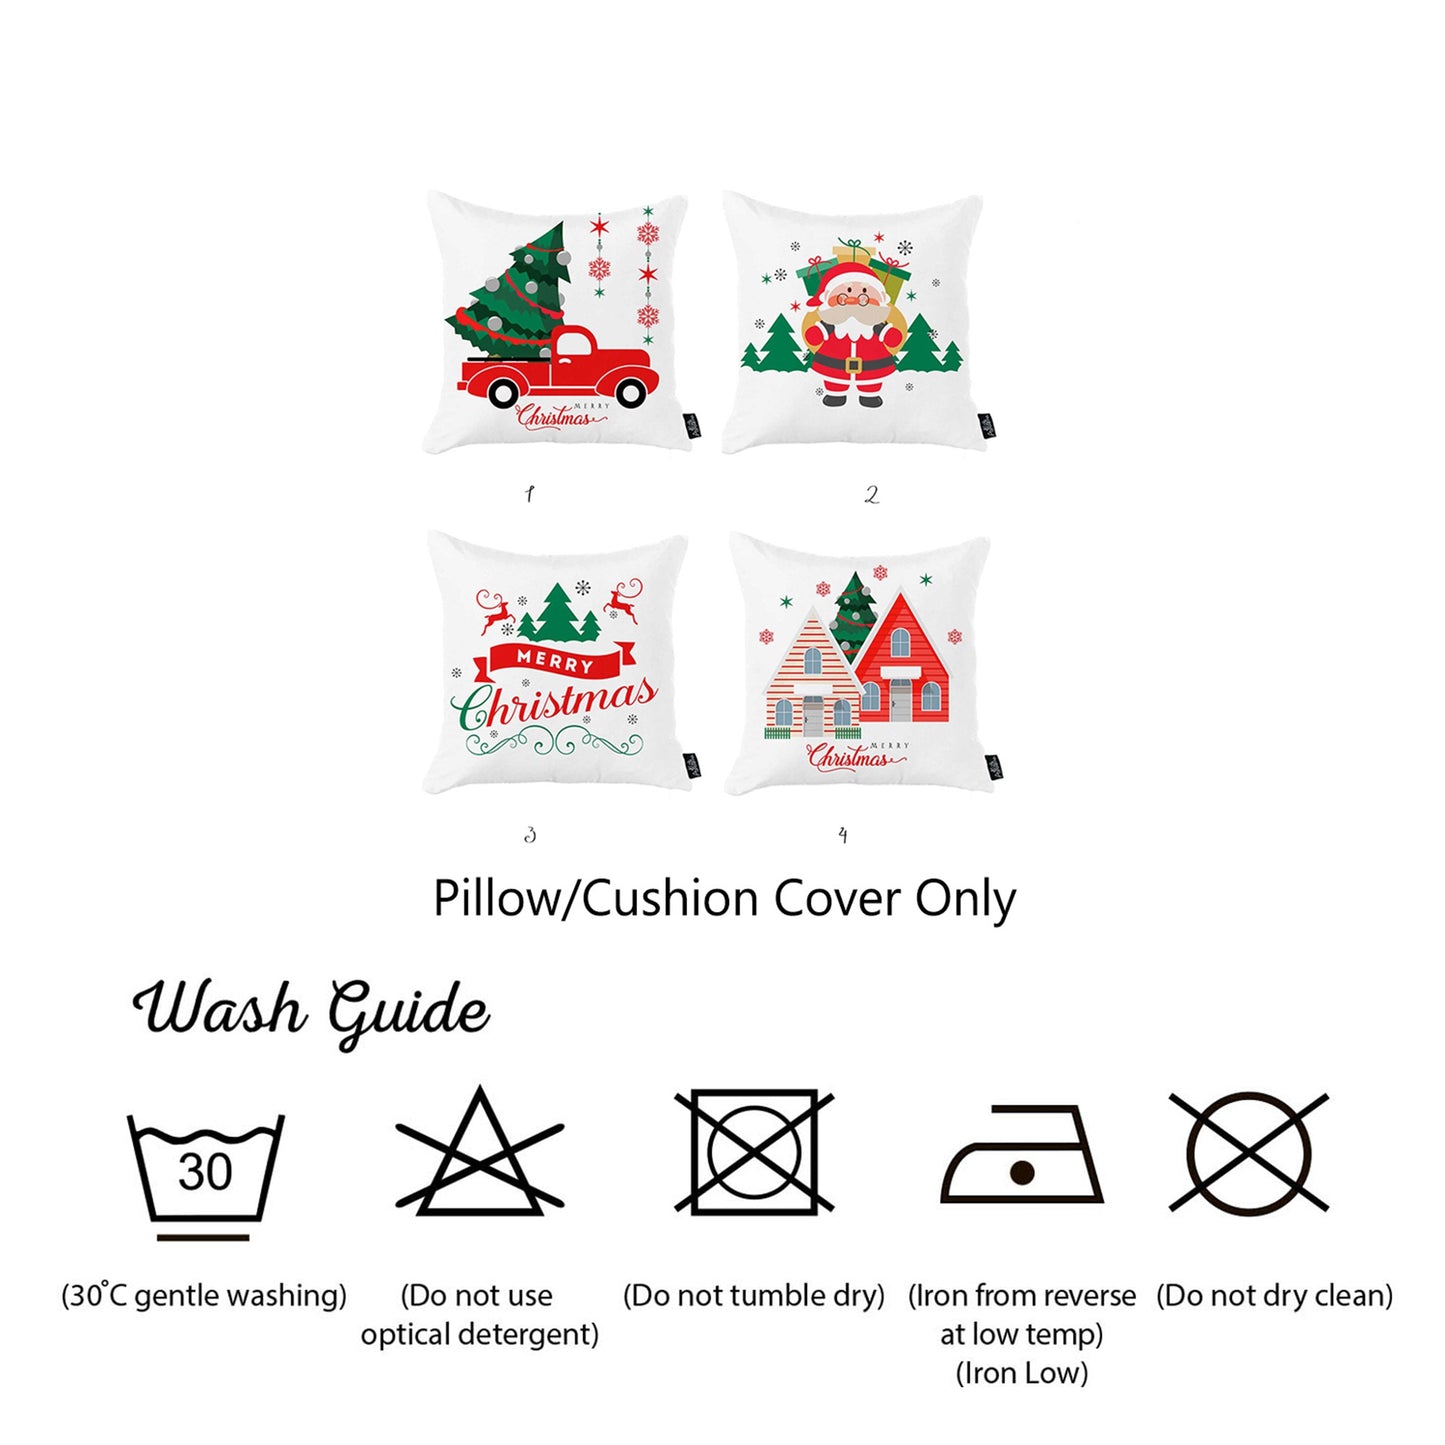 Decorative Christmas Themed Throw Pillow Cover Set of 4 Square 18" x 18" Multi-Color for Couch, Bedding